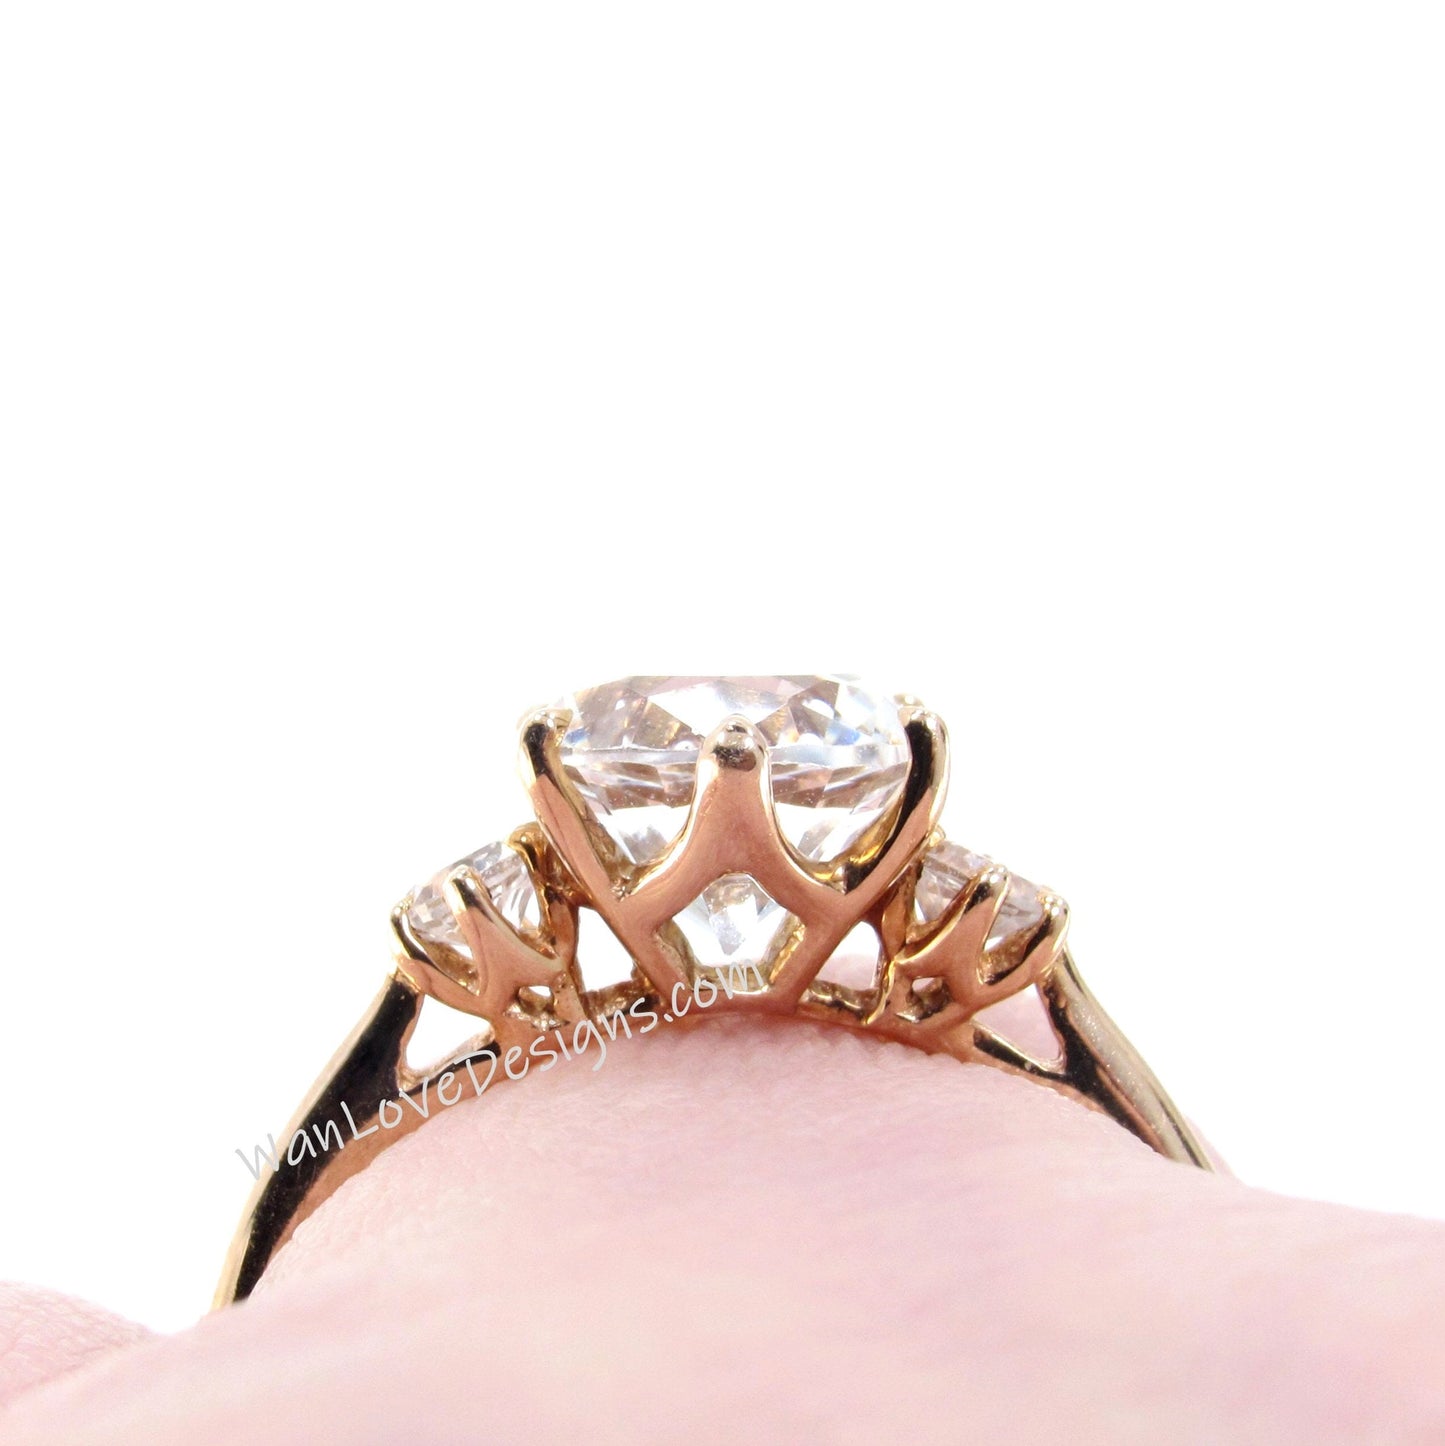 White Sapphire 3 Gem Stone Engagement Ring Vintage Round 2ct Rose Gold Trellis 6 prong Wedding Ring Promise Anniversary Gift-Ready to Ship